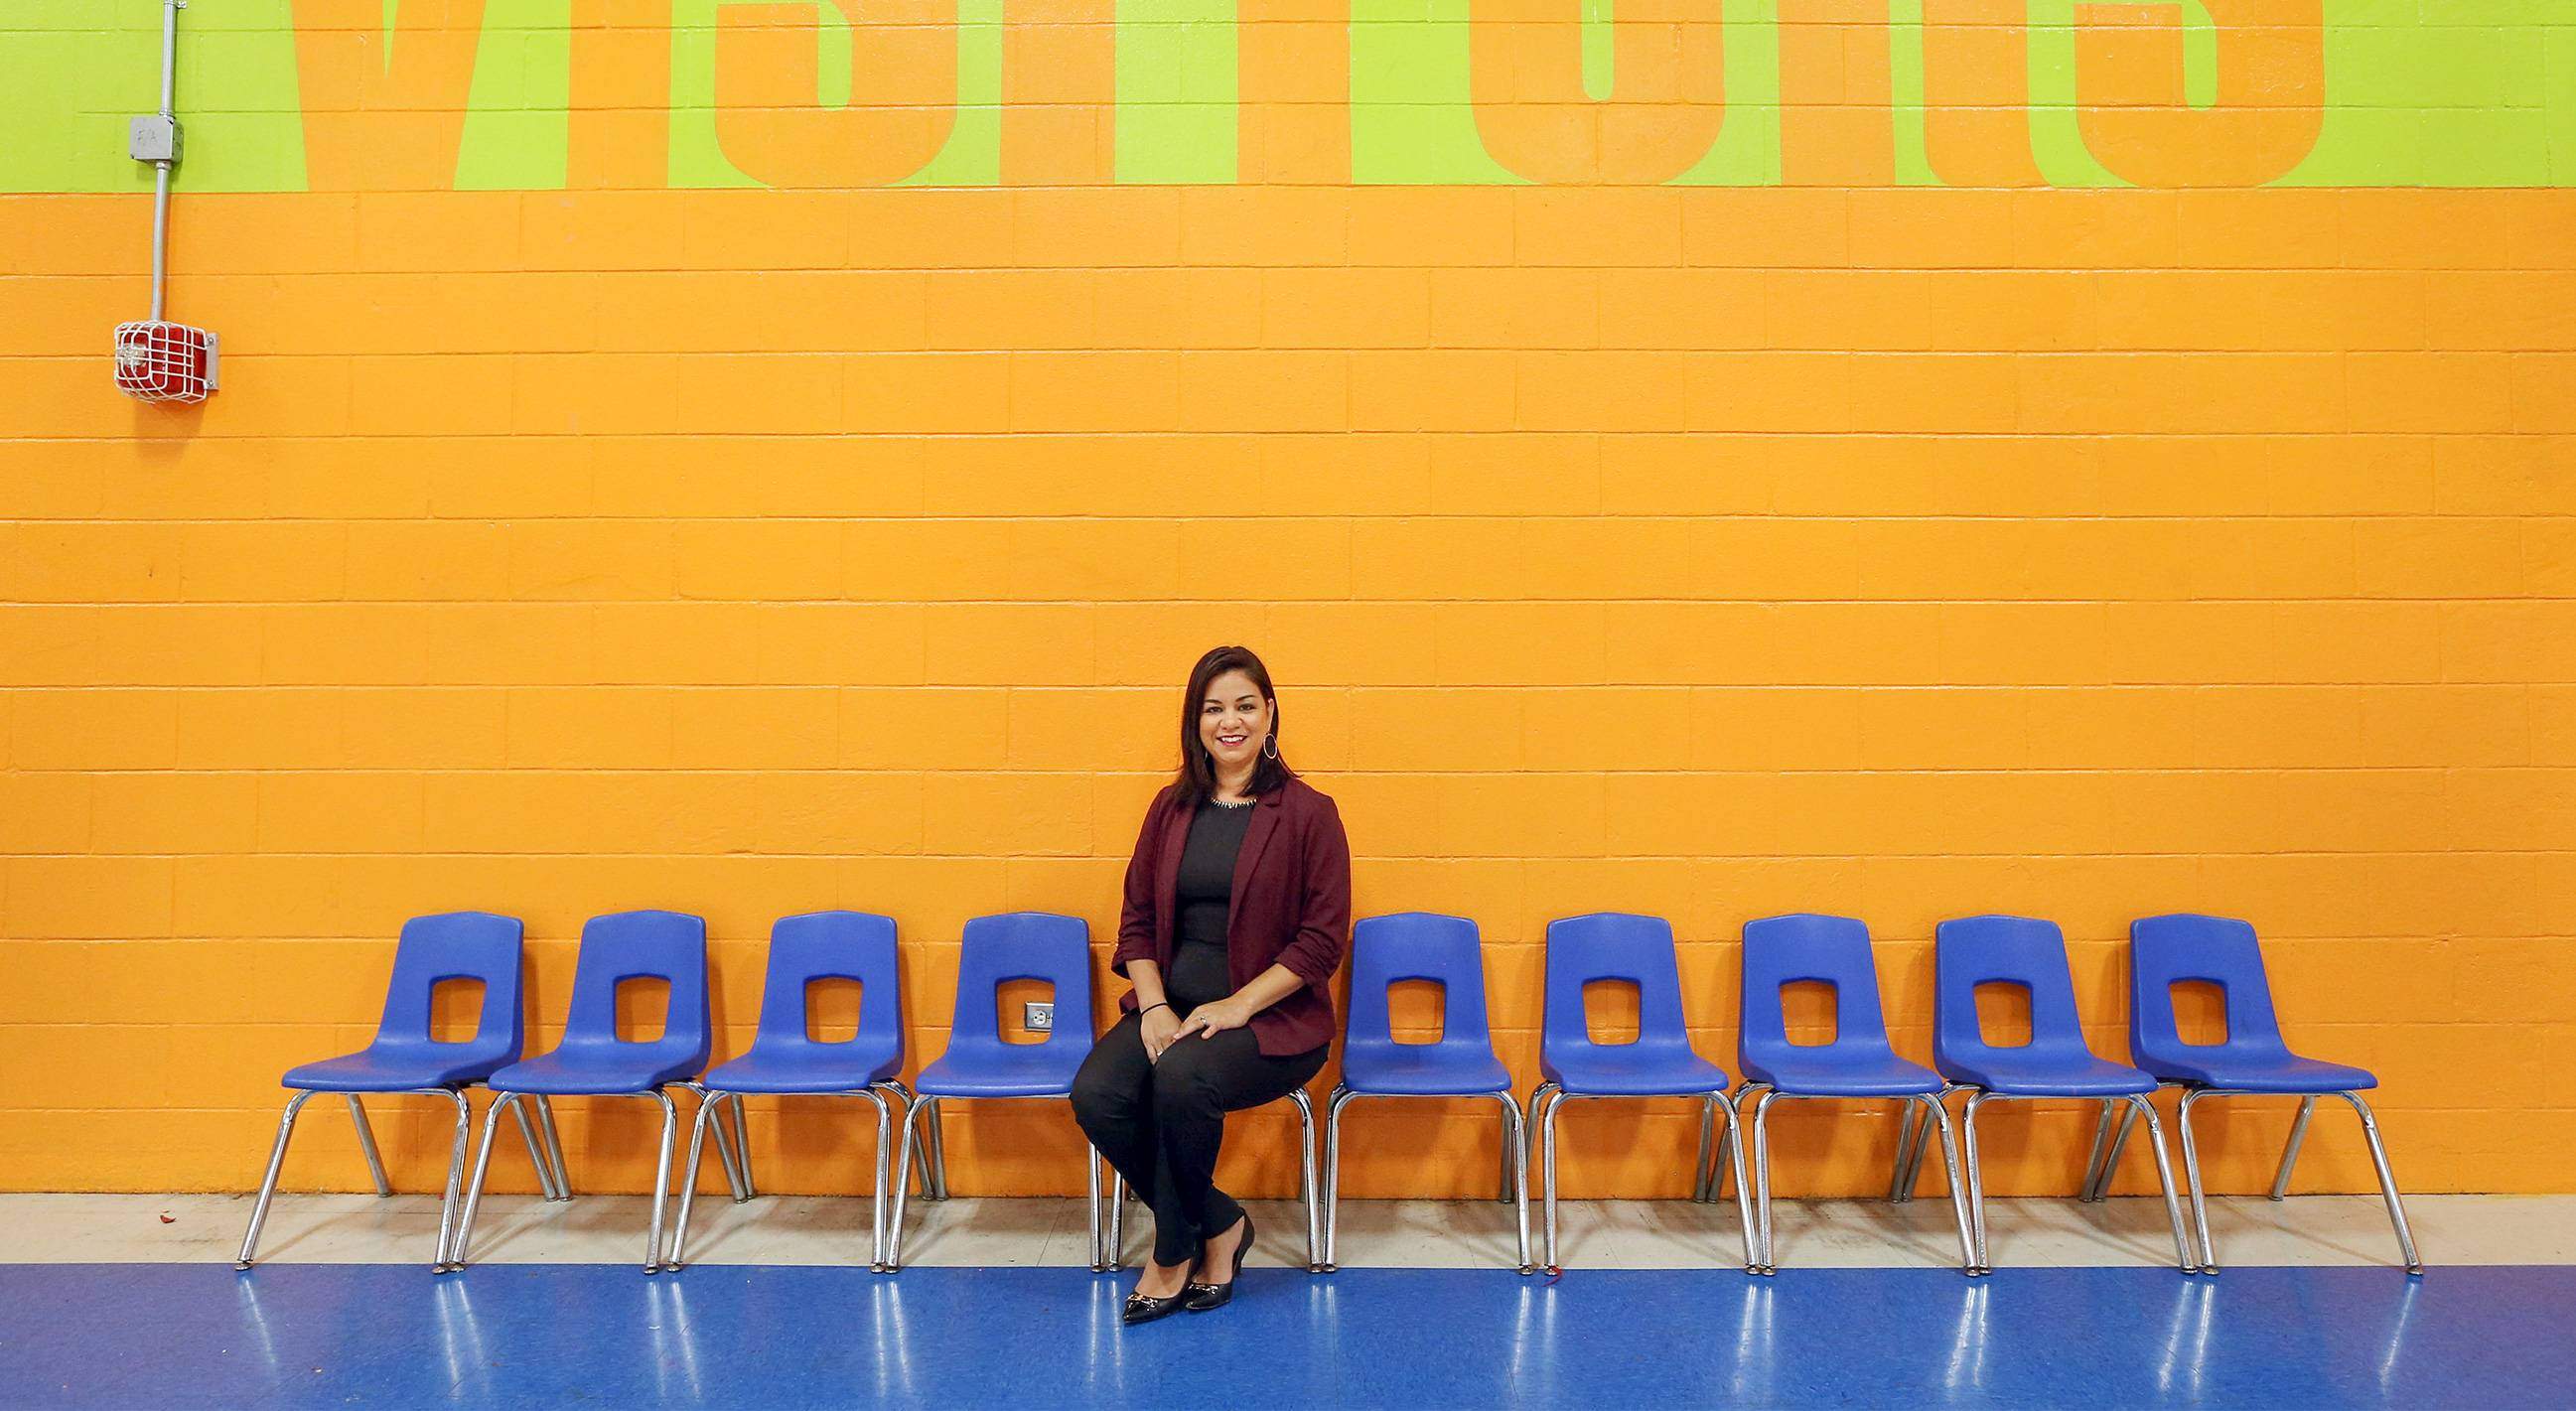 Gonzalez-Alcantar sits in the middle of a row of blue classroom chairs against a bright orange brick wall